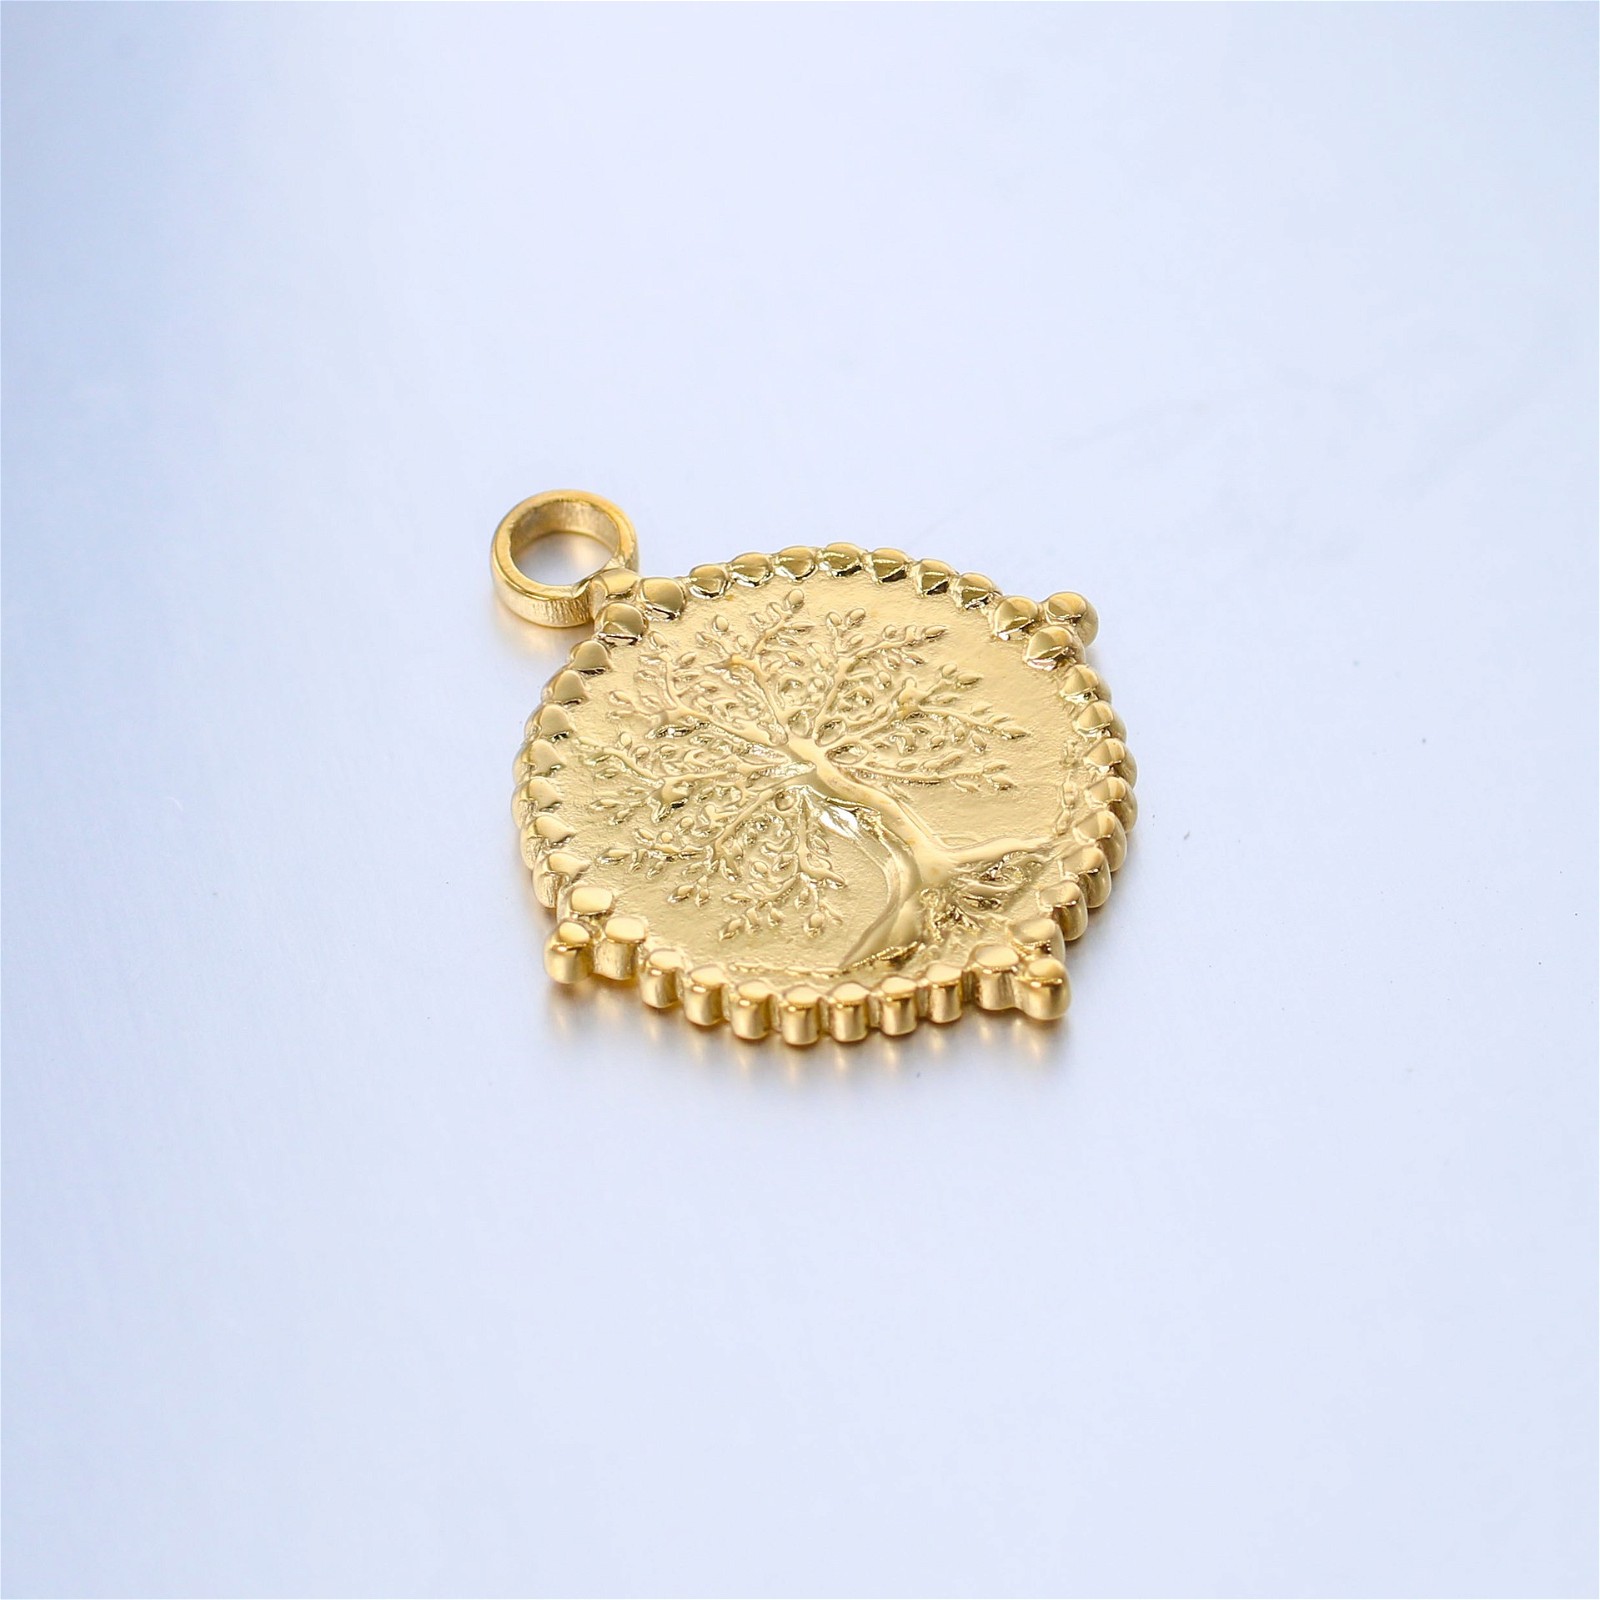 Gold medallion pendant with a tree/ surgical steel/ 22x19mm 1pc ASS401KG